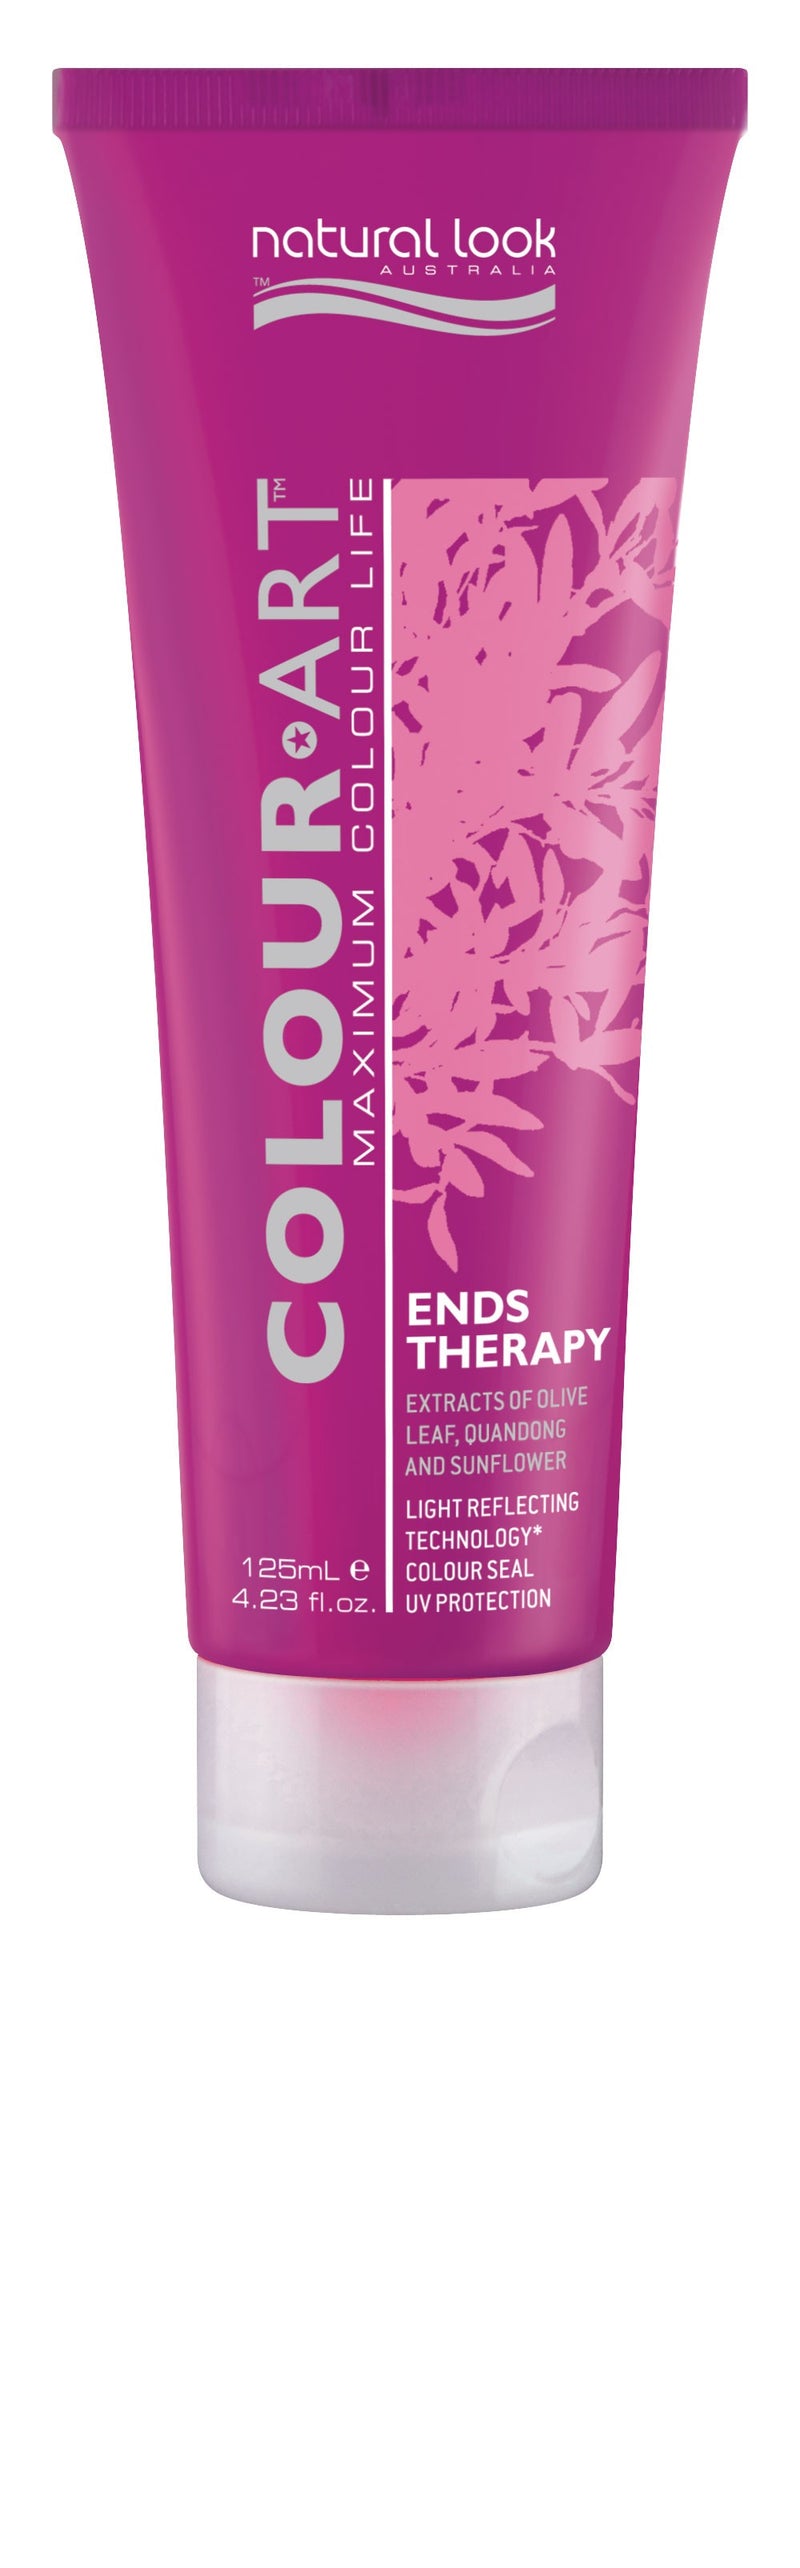 Natural Look Colour Art Ends Therapy 125ml